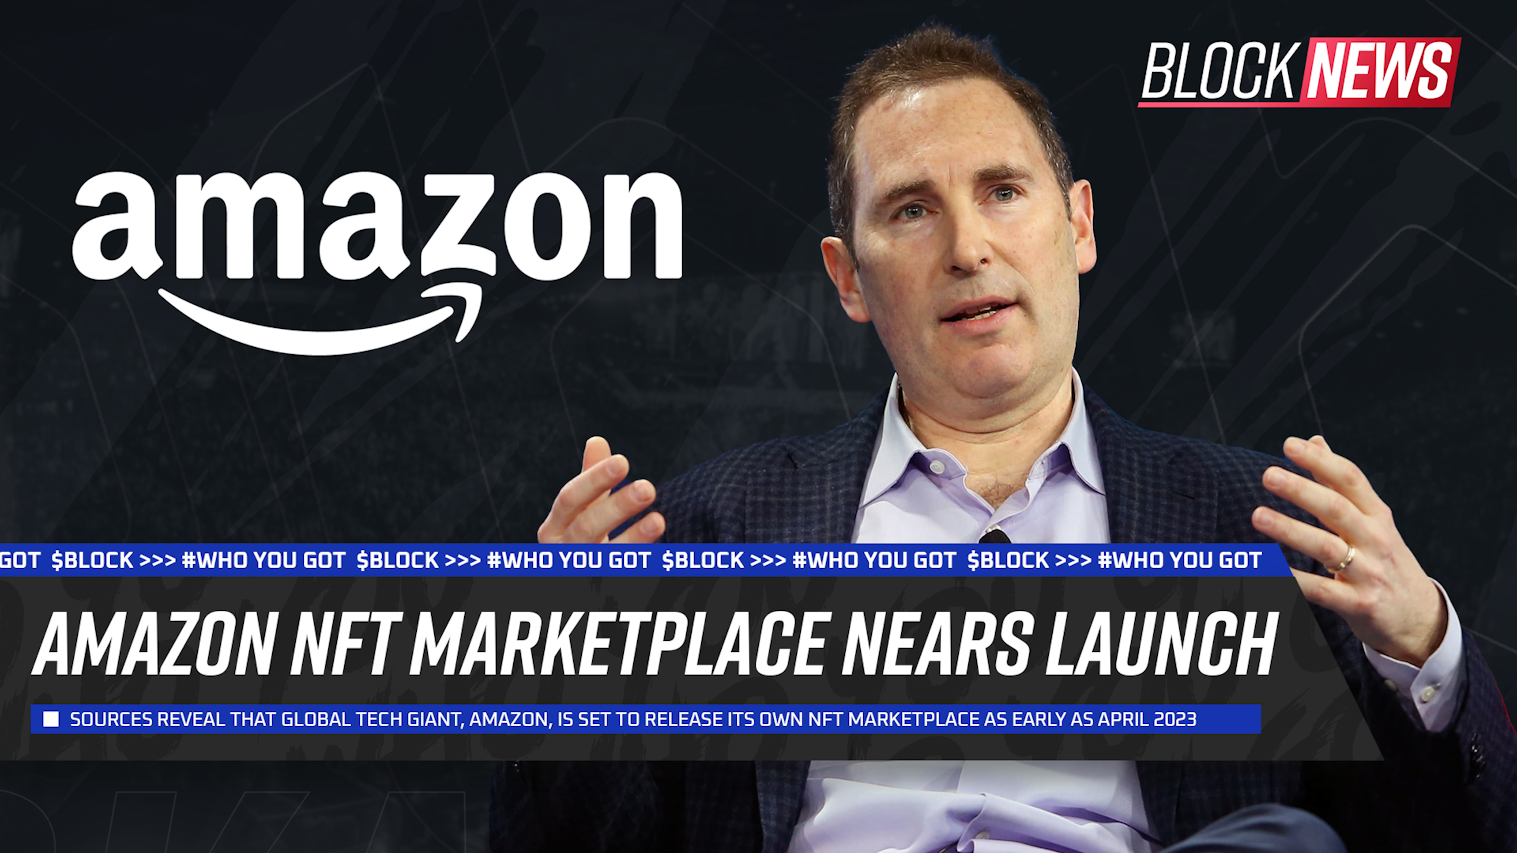 No official confirmation has been seen from Amazon yet, but sources reveal an April 2023 launch is targeted.